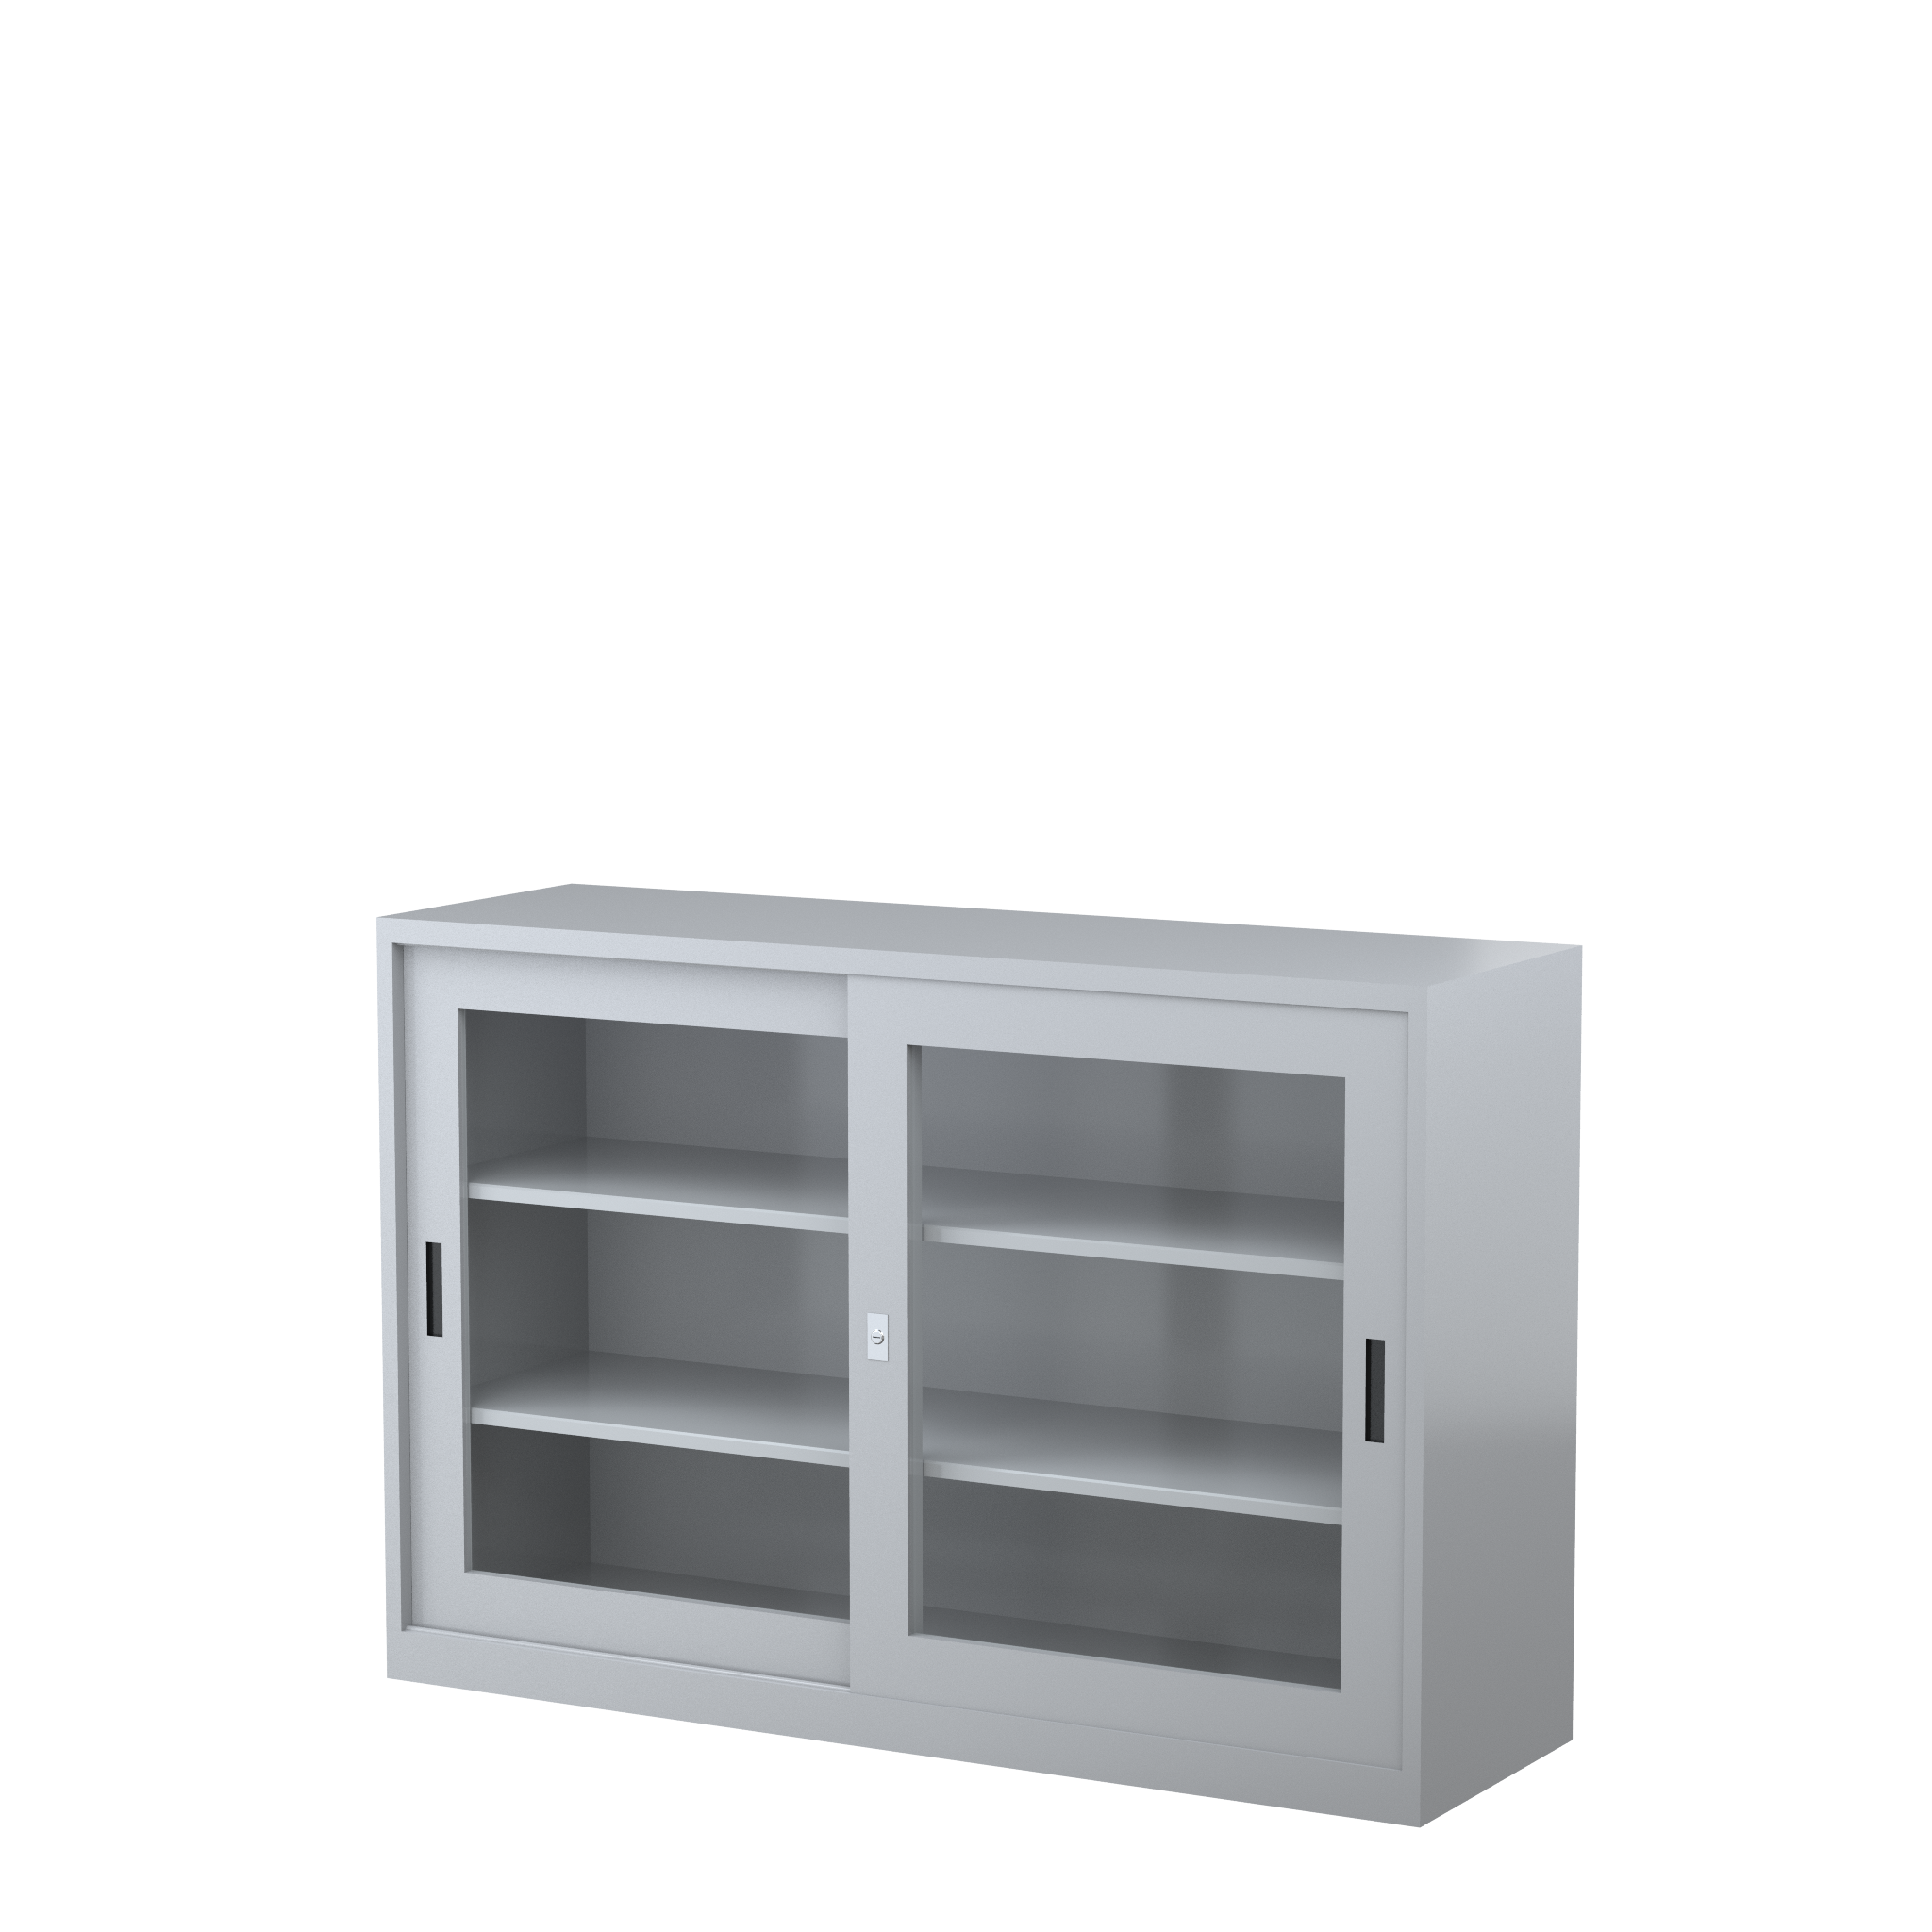 GD1015_1500 - STEELCO SG Cabinet 1015H x 1500W x 465D - 2 Shelves-SG.png